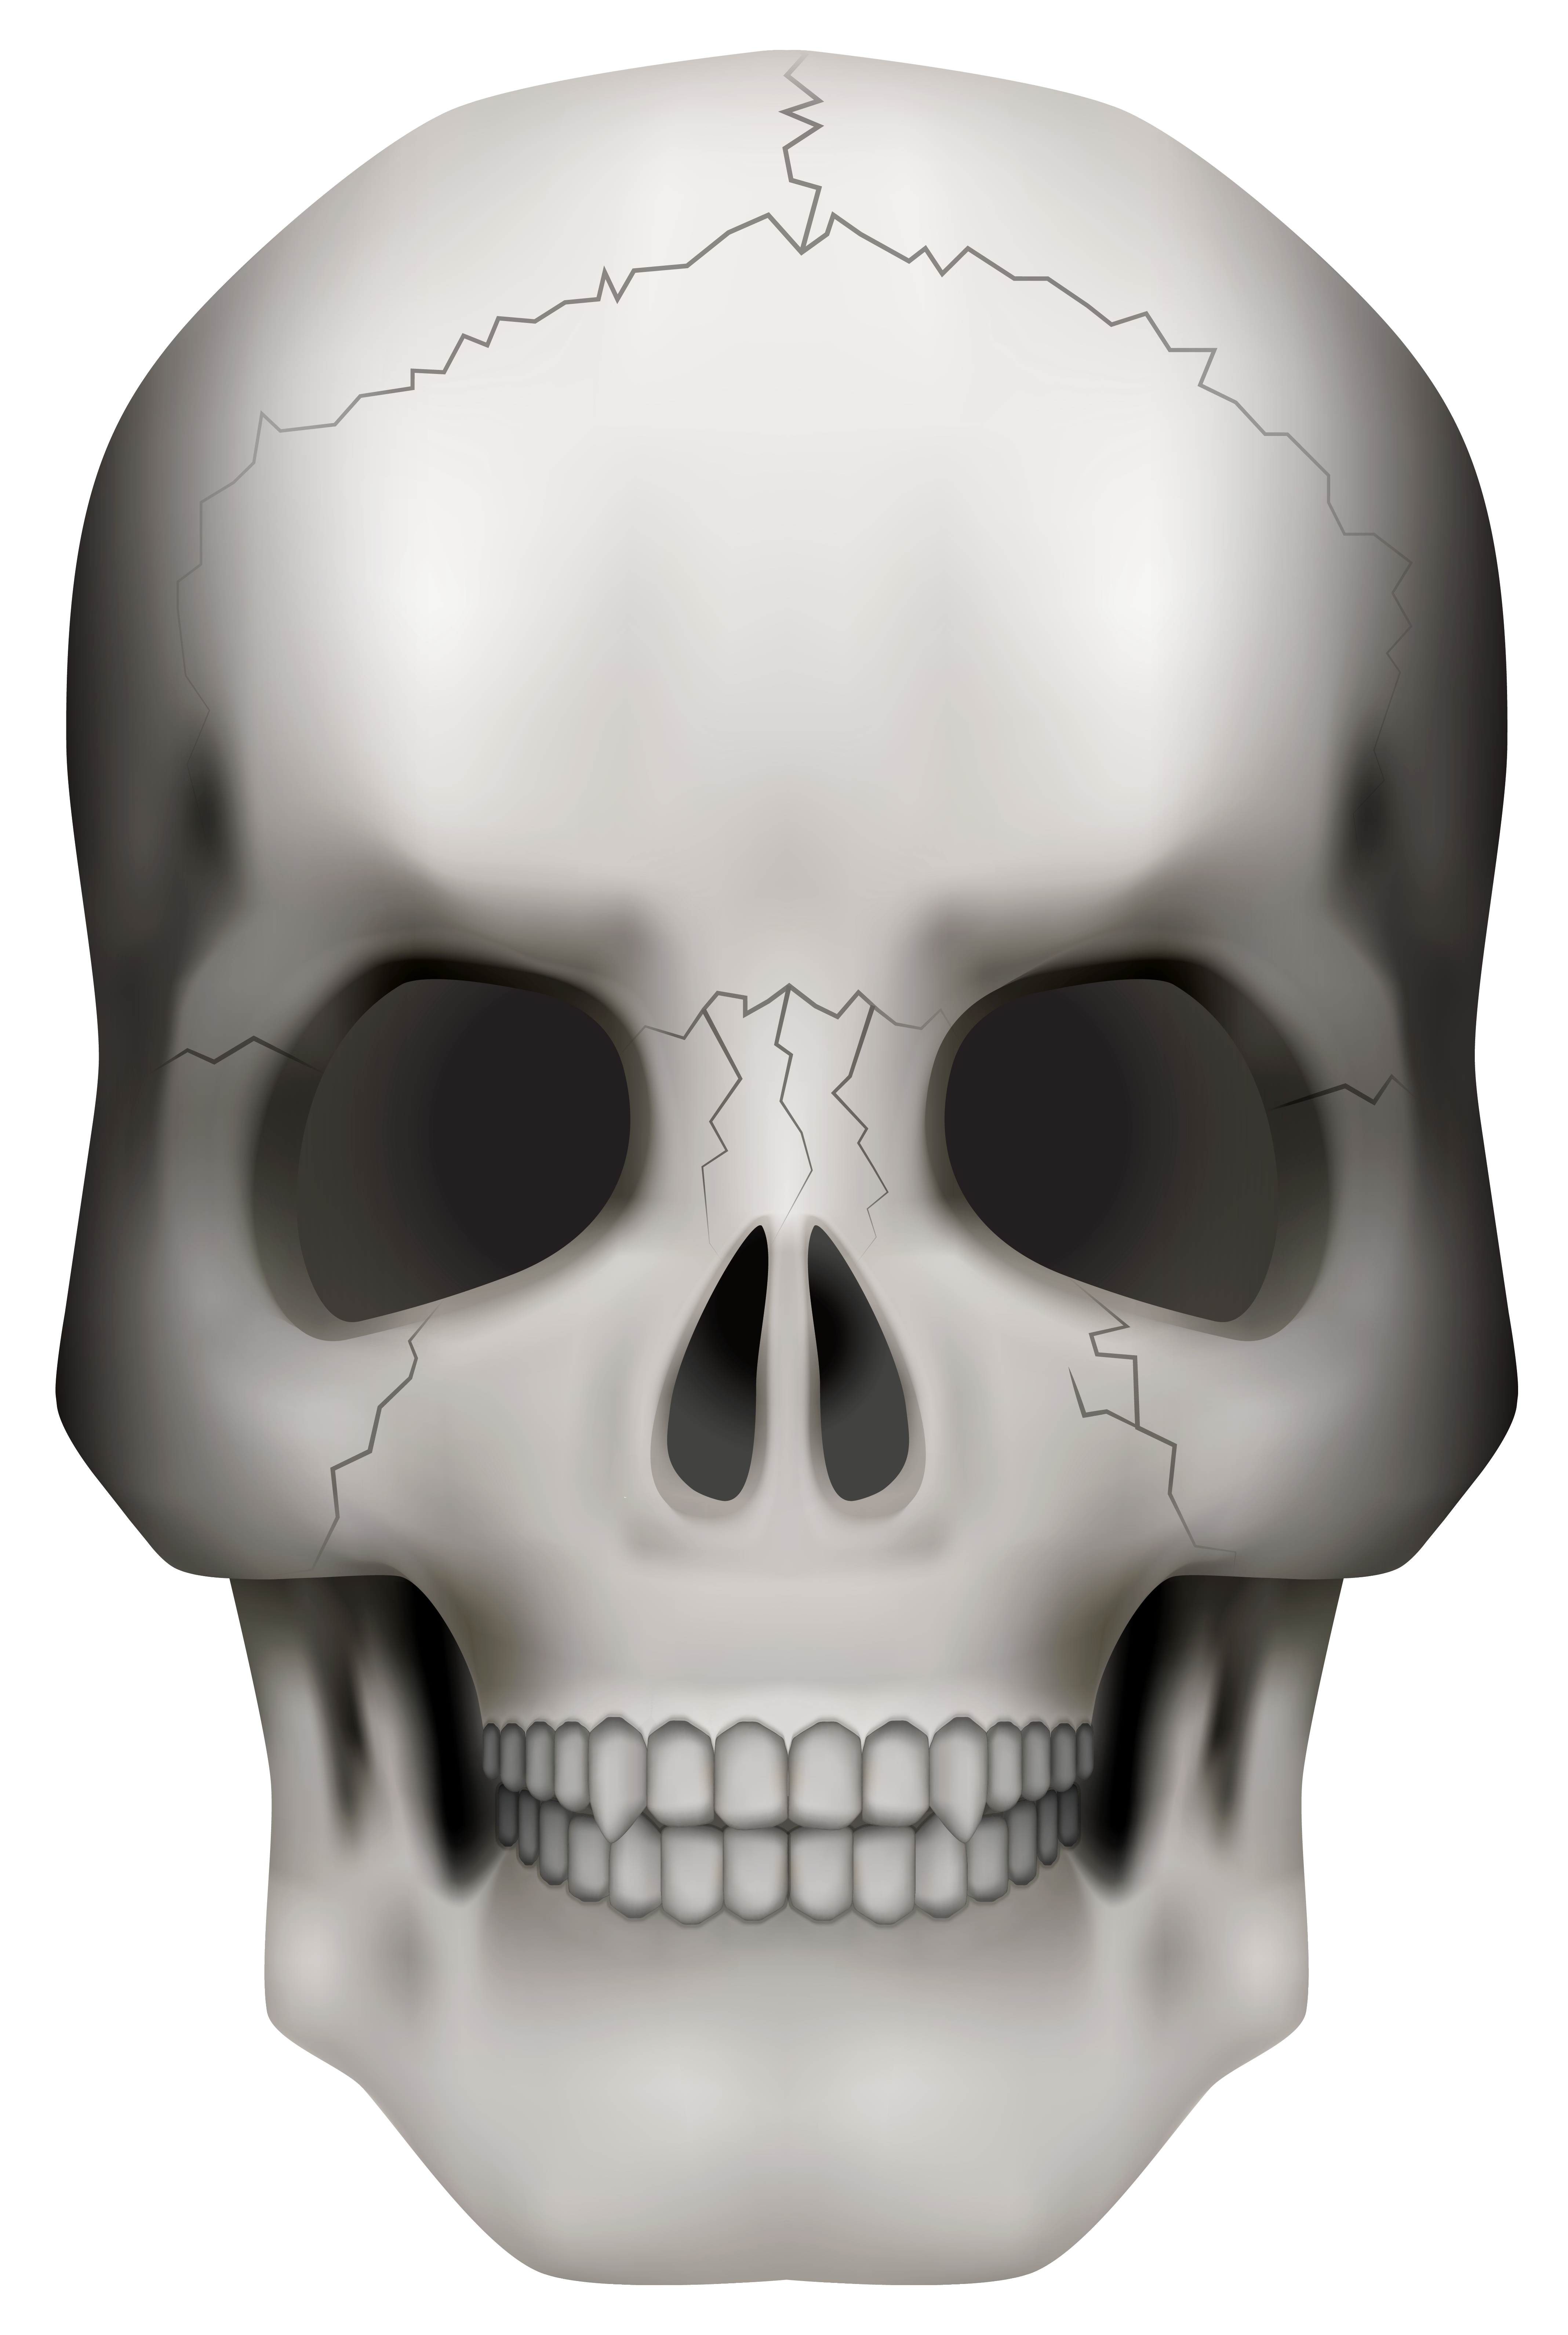 Skull PNG Clipart Image